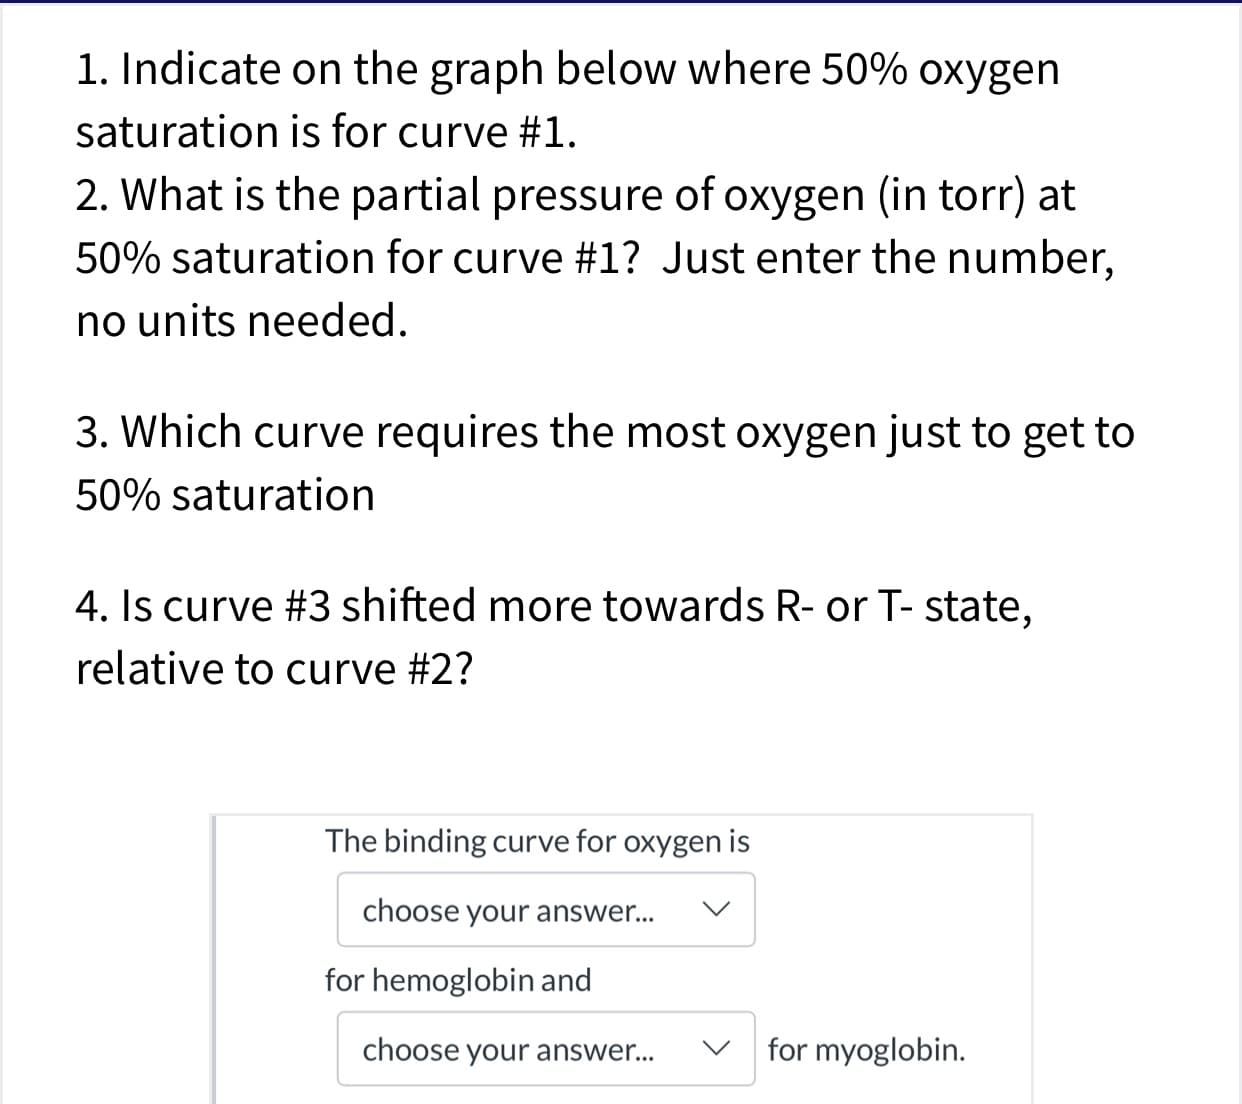 1. Indicate on the graph below where 50% oxygen
saturation is for curve #1.
2. What is the partial pressure of oxygen (in torr) at
50% saturation for curve #1? Just enter the number,
no units needed
3. Which curve requires the most oxygen just to get to
50% saturation
4. Is curve #3 shifted more towards R- or T- state,
relative to curve #2?
The binding curve for oxygen is
choose your answer...
V
for hemoglobin and
for myoglobin.
choose your answe...
